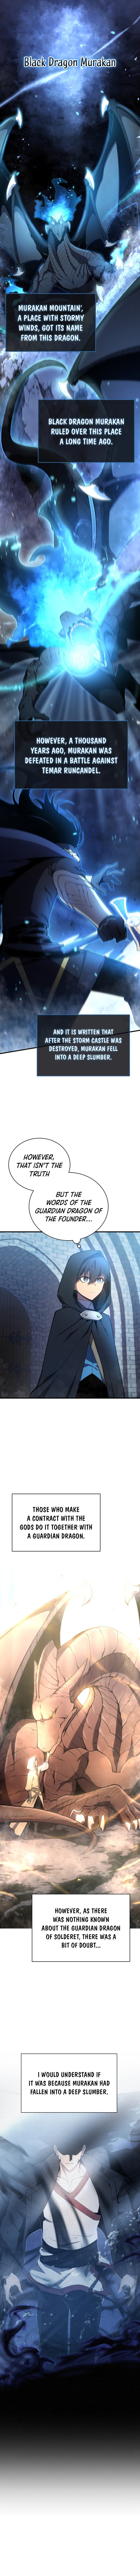 Swordmaster’s Youngest Son - Chapter 6 Page 1